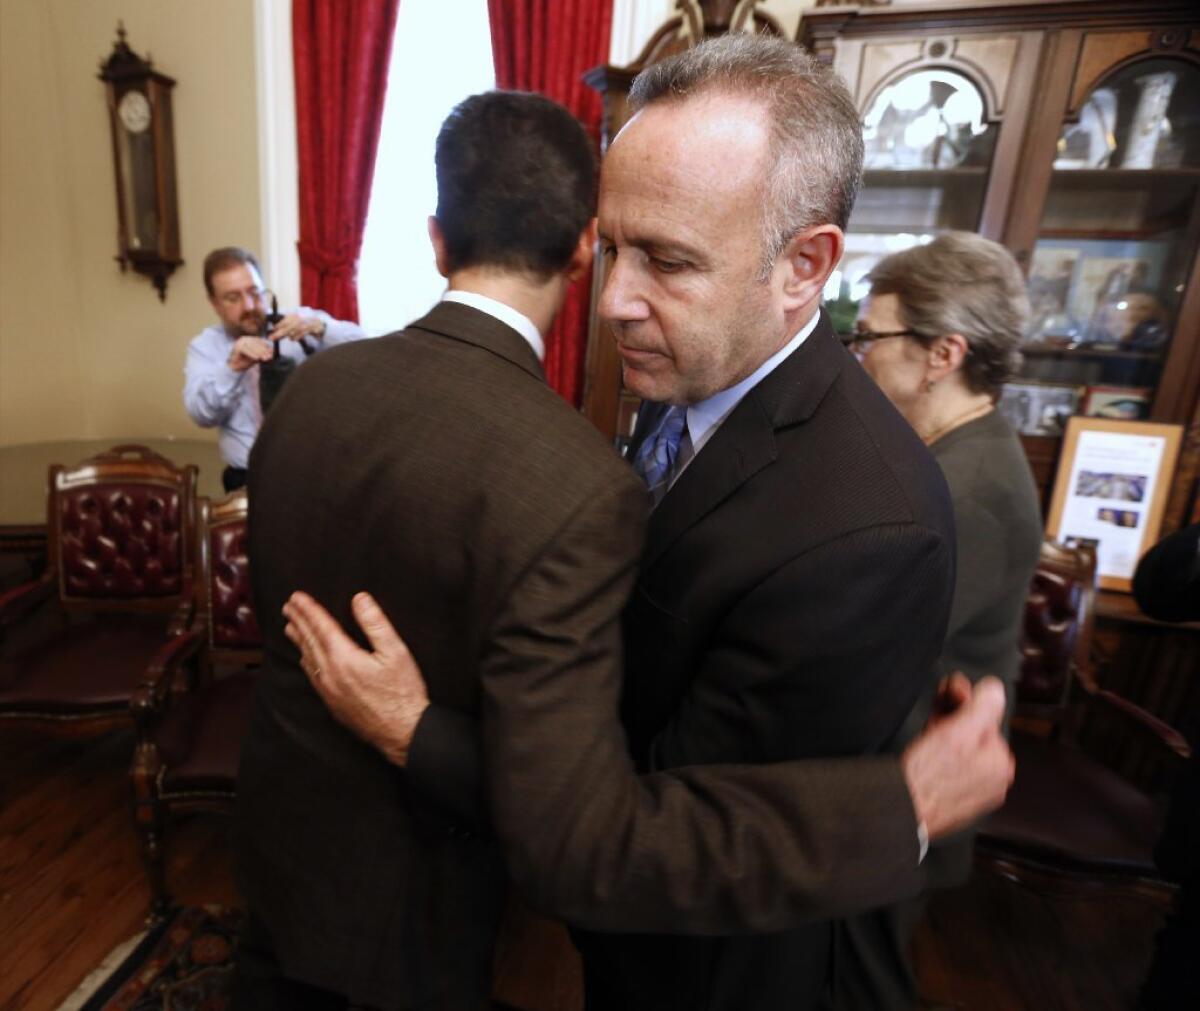 State Senate President Pro Tem Darrell Steinberg (D-Sacramento), right, is consoled by Sen. Mark Leno (D-San Francisco) after he and fellow Democrats on Wednesday called on Sen. Leland Yee (D-San Francisco) to resign in the wake of his arrest on federal corruption and firearm charges.